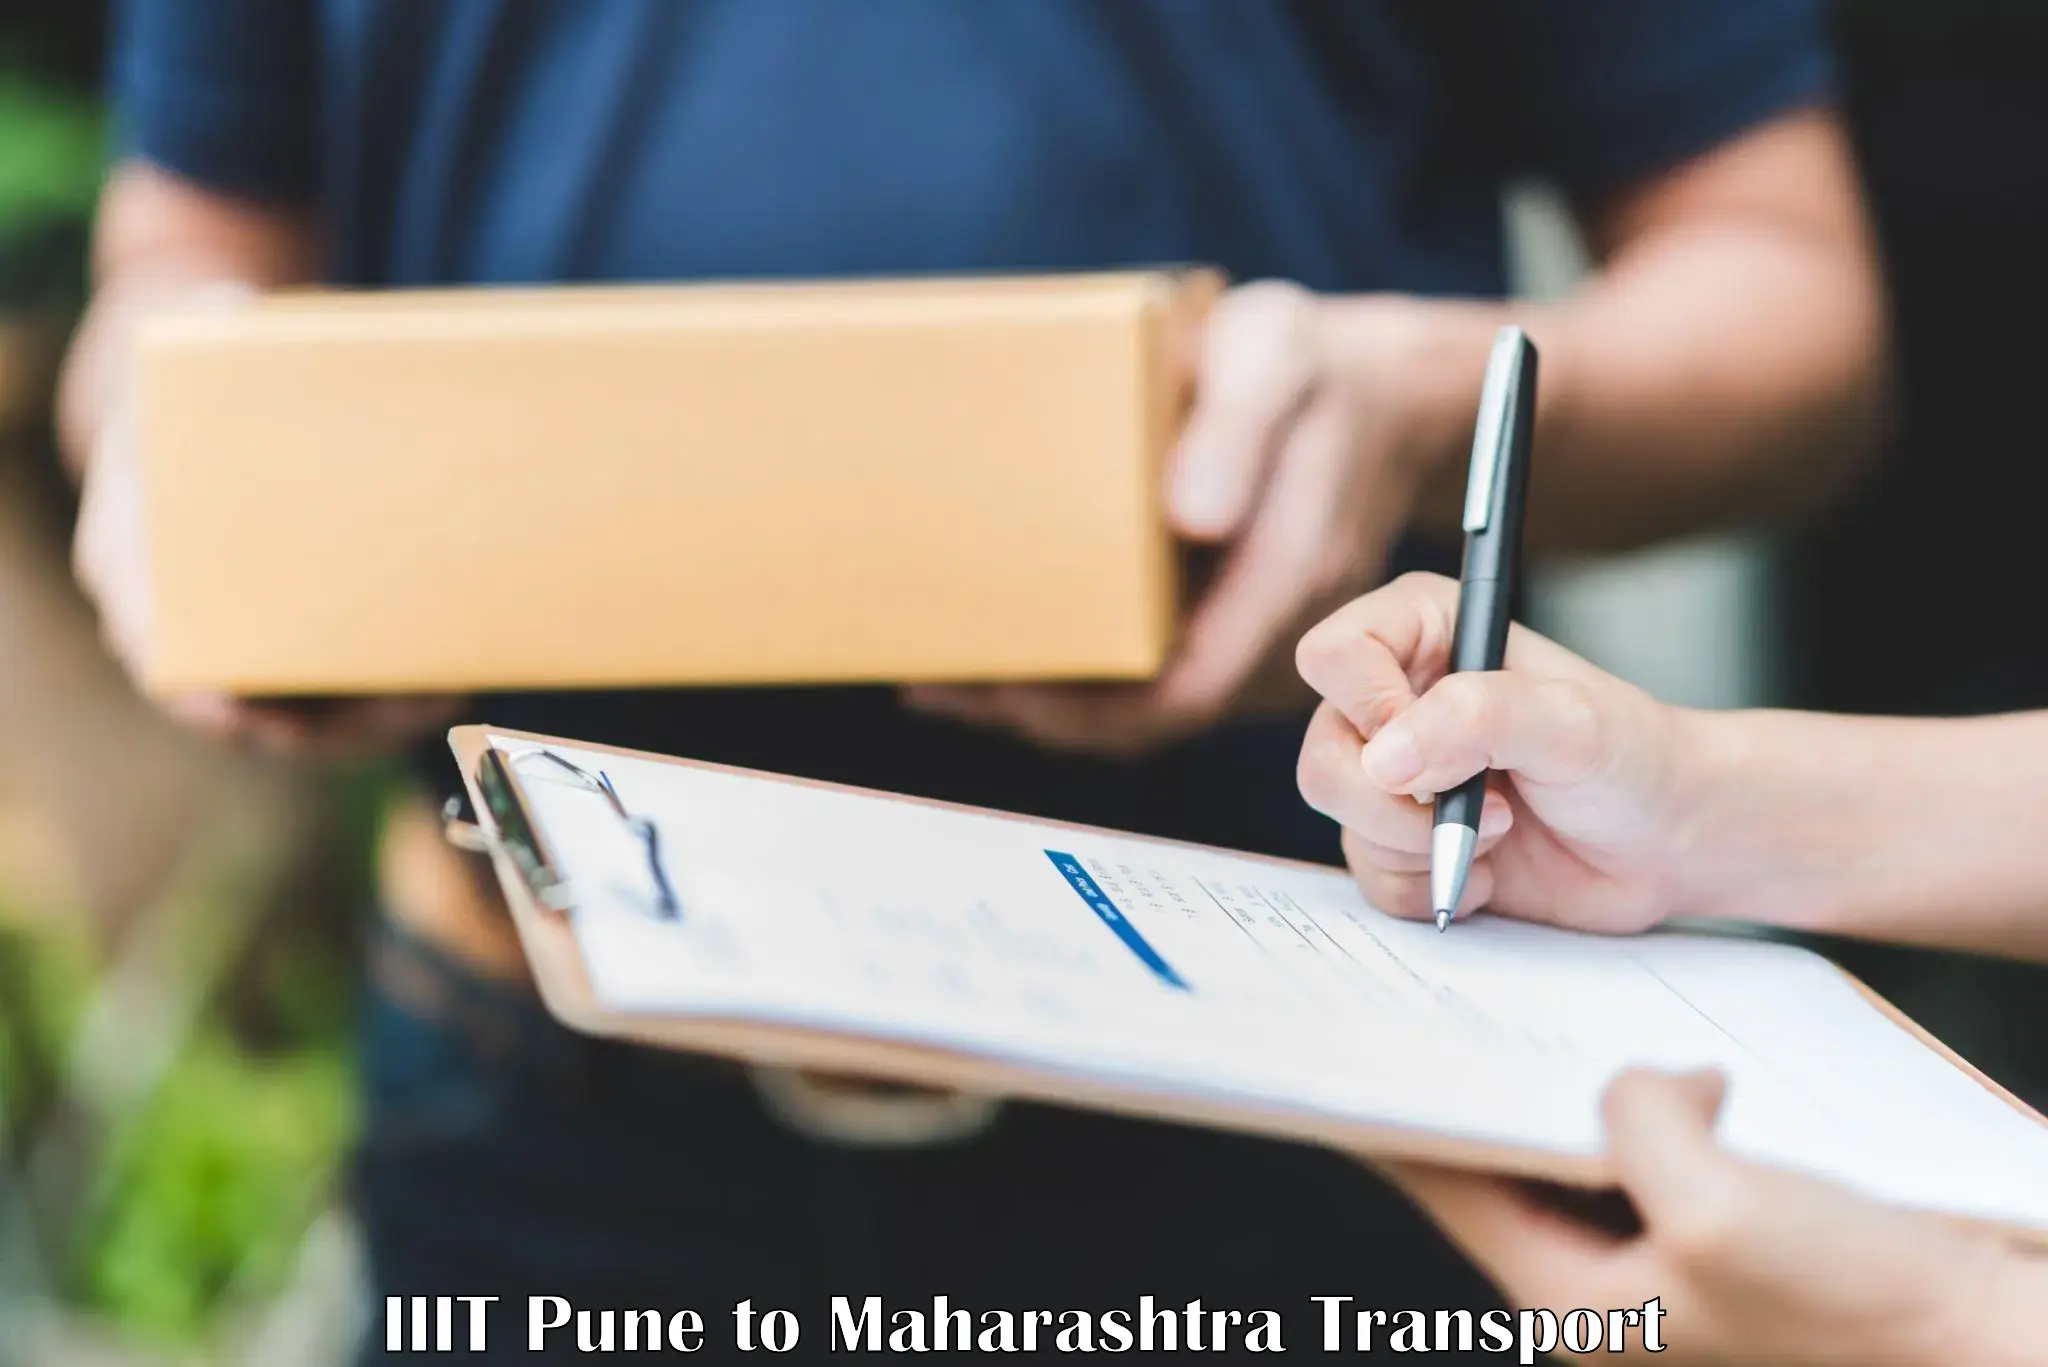 Container transport service IIIT Pune to Maharashtra